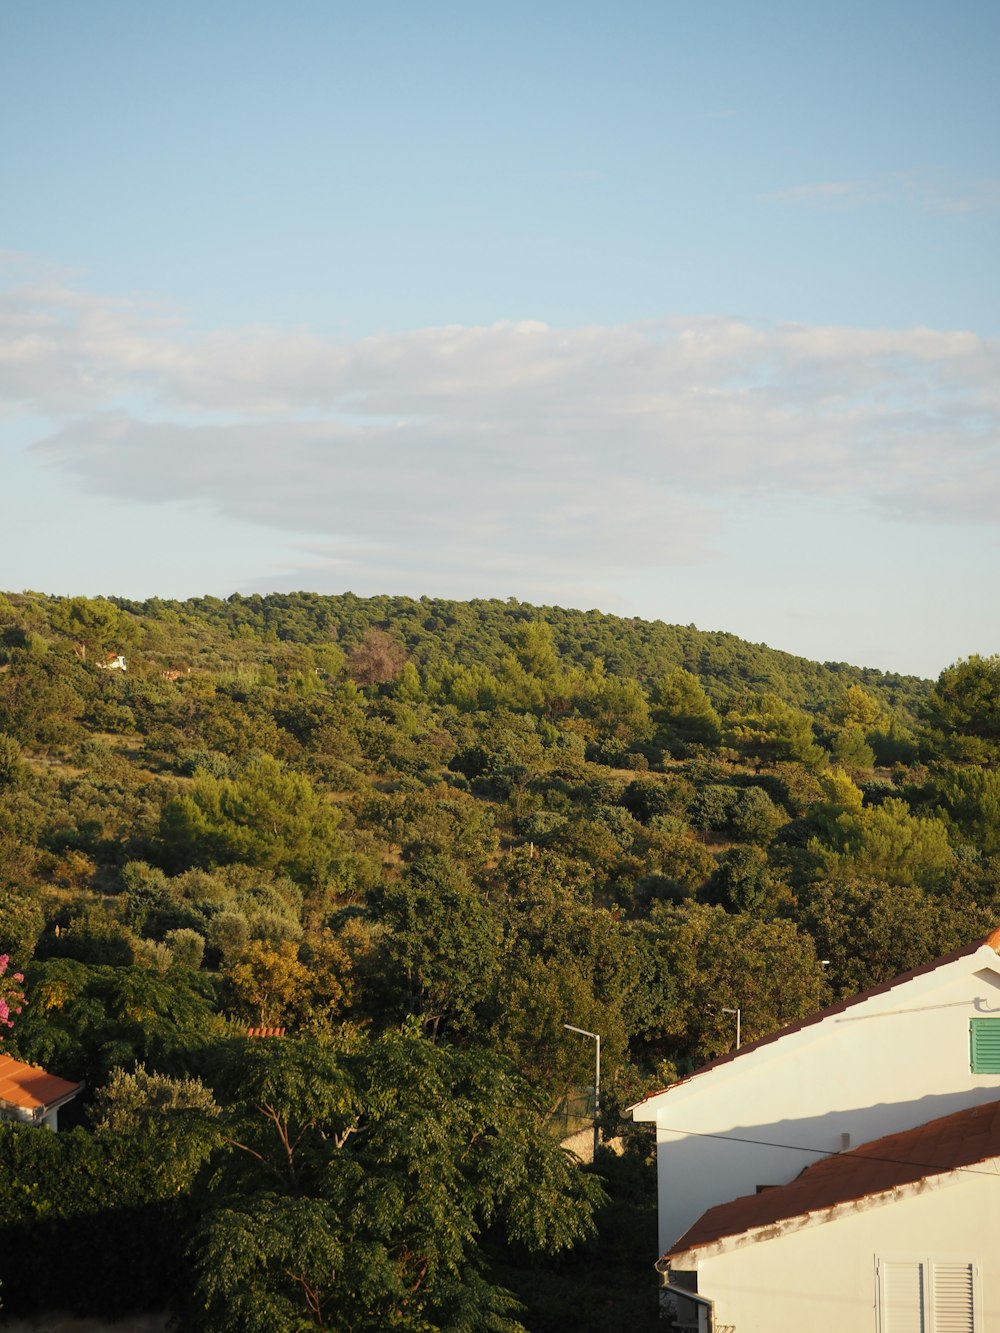 a view of a hill with trees and buildings